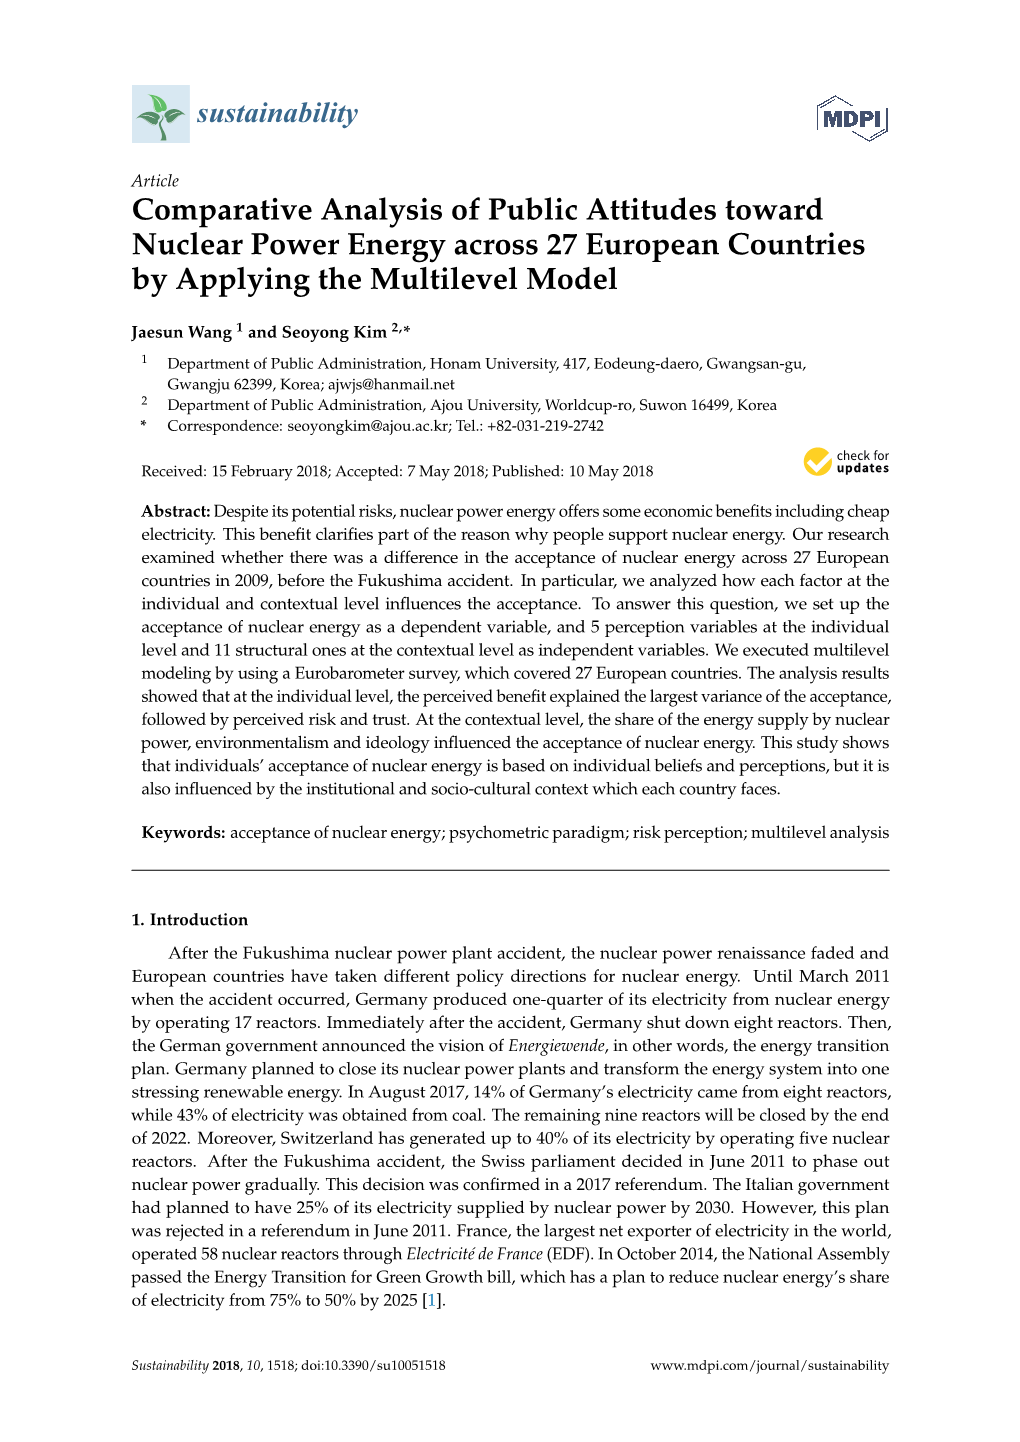 Comparative Analysis of Public Attitudes Toward Nuclear Power Energy Across 27 European Countries by Applying the Multilevel Model